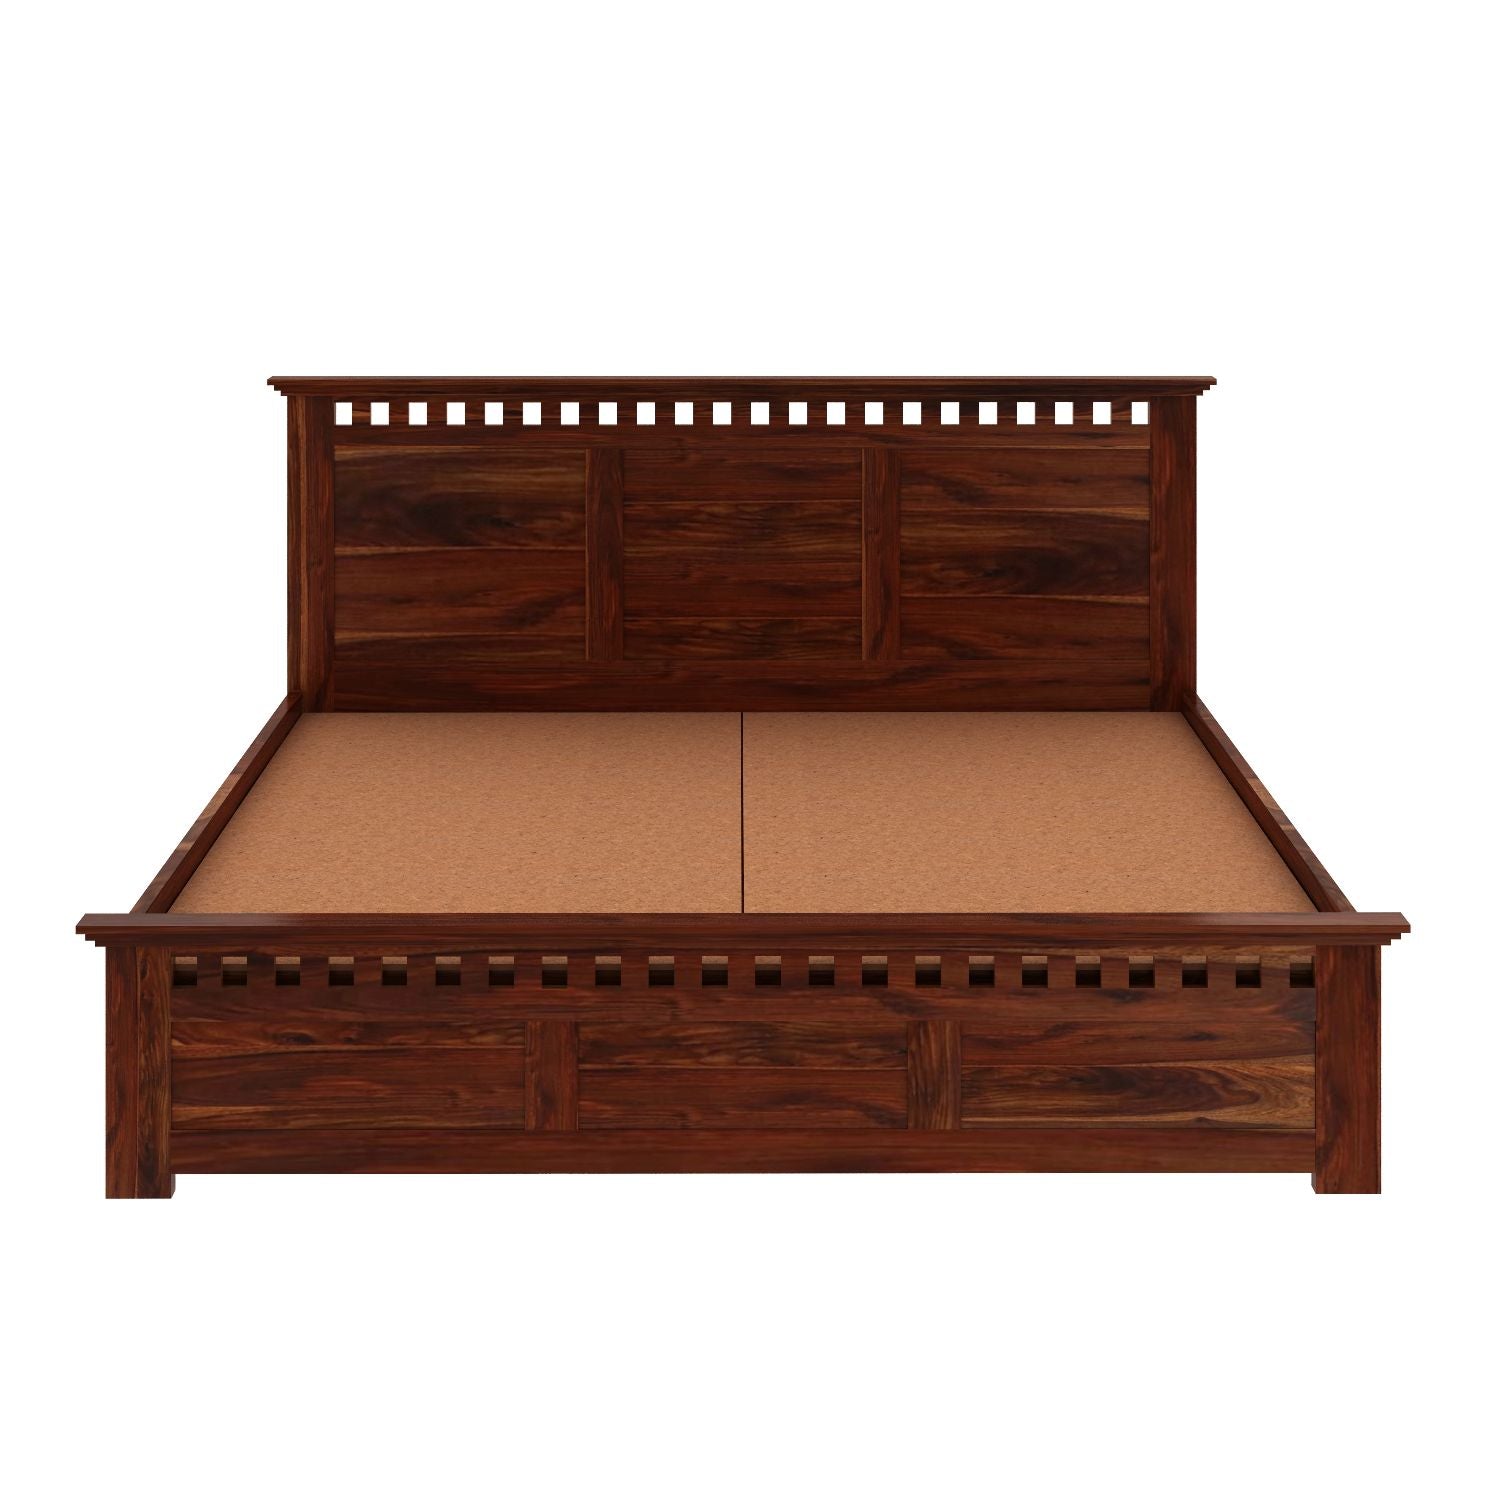 Amer Solid Sheesham Wood Bed With Four Drawers (Queen Size, Natural Finish)